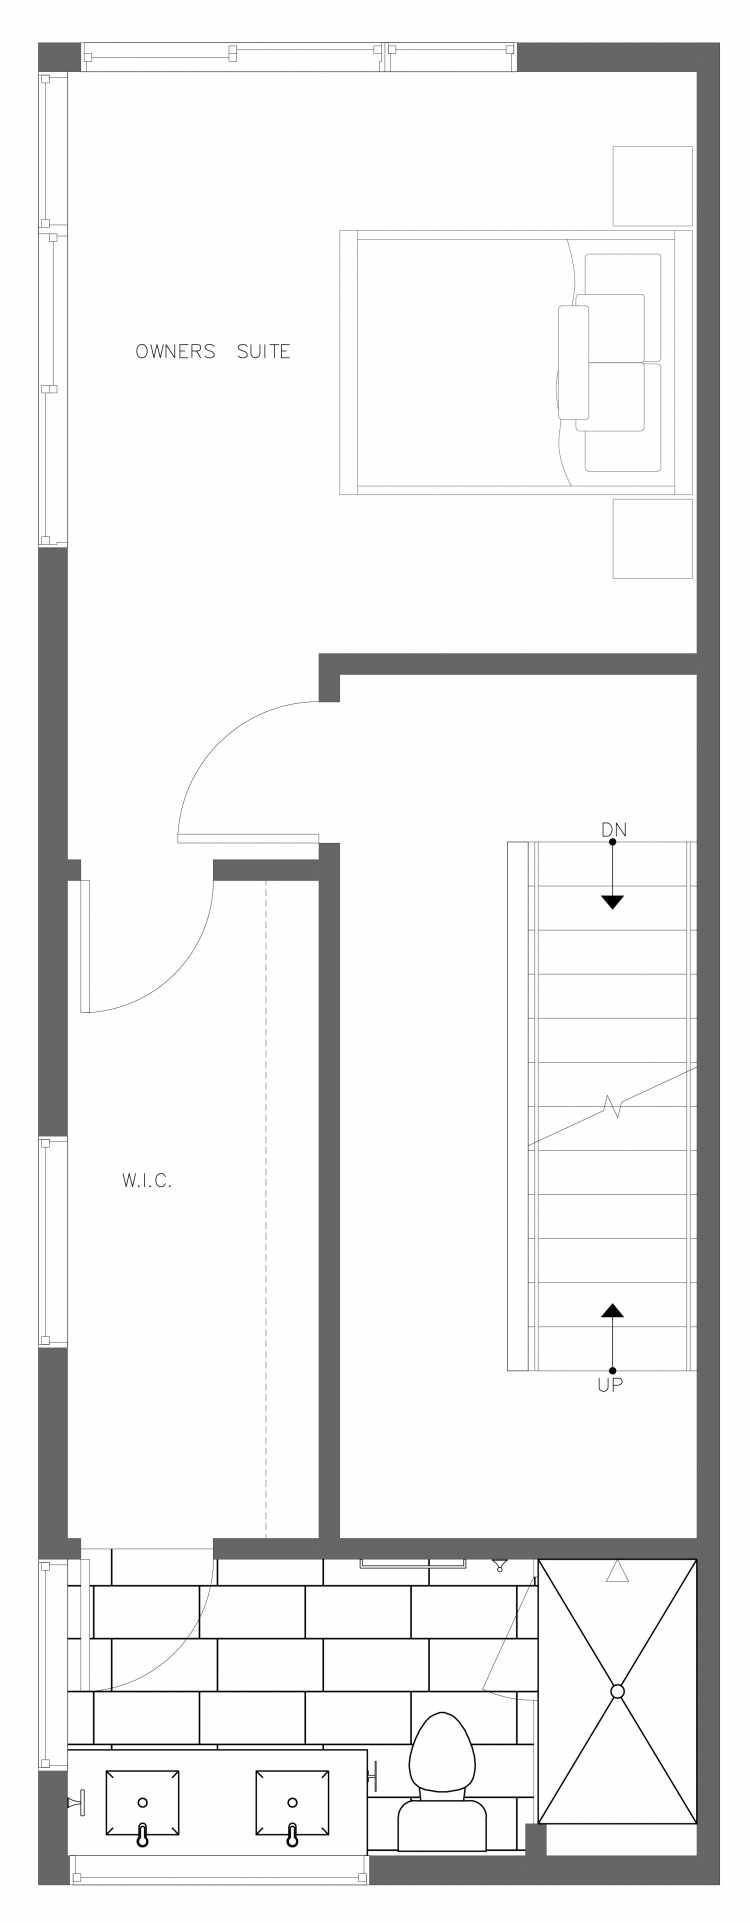 Third Floor Plan of 3418A 15th Ave W, One of the Arlo Townhomes in North Queen Anne